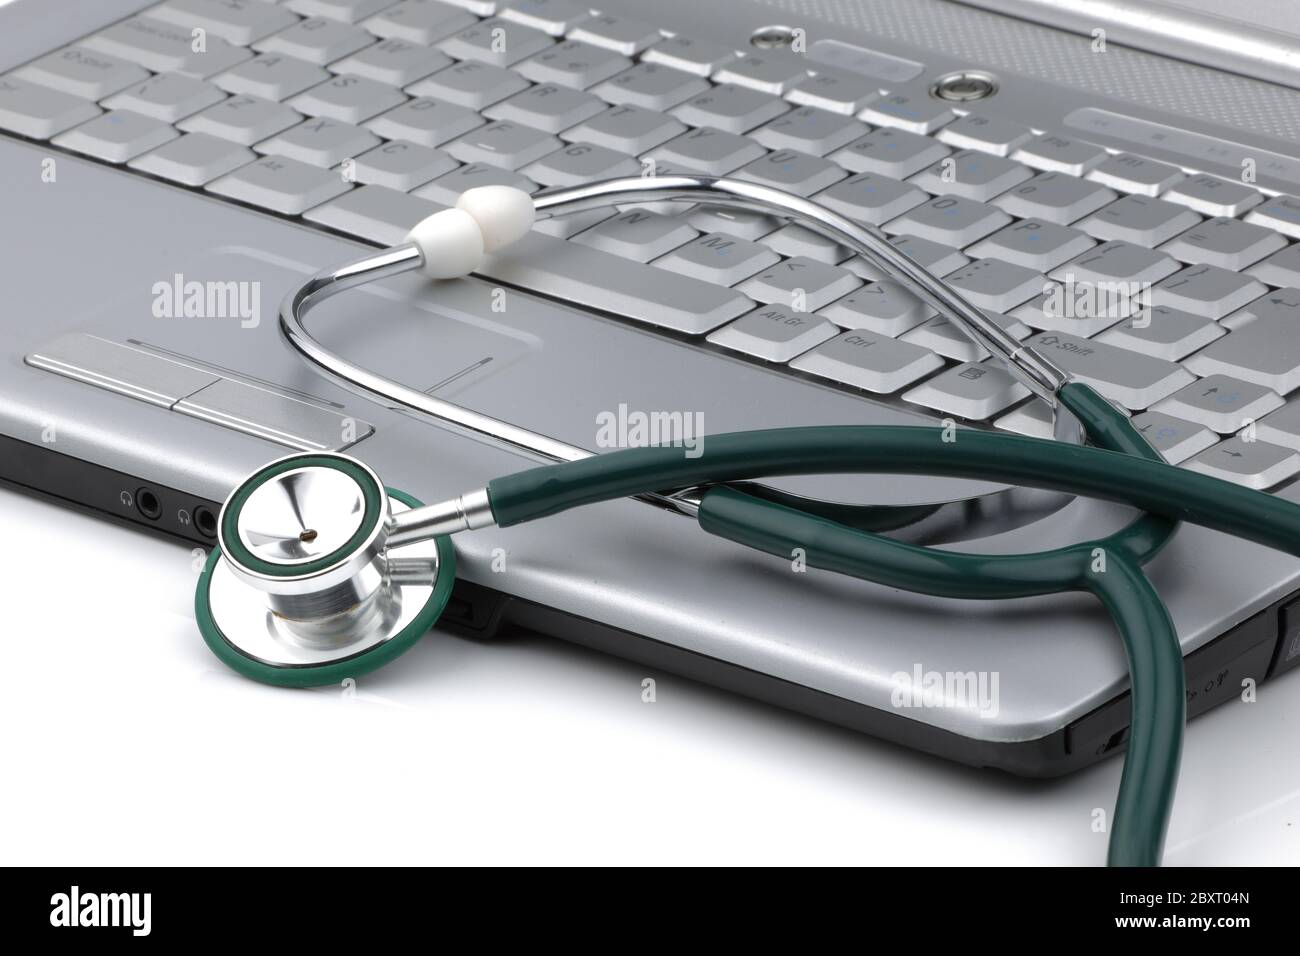 stethoscope next to a laptop signifying the relationship of information technology and medicine Stock Photo